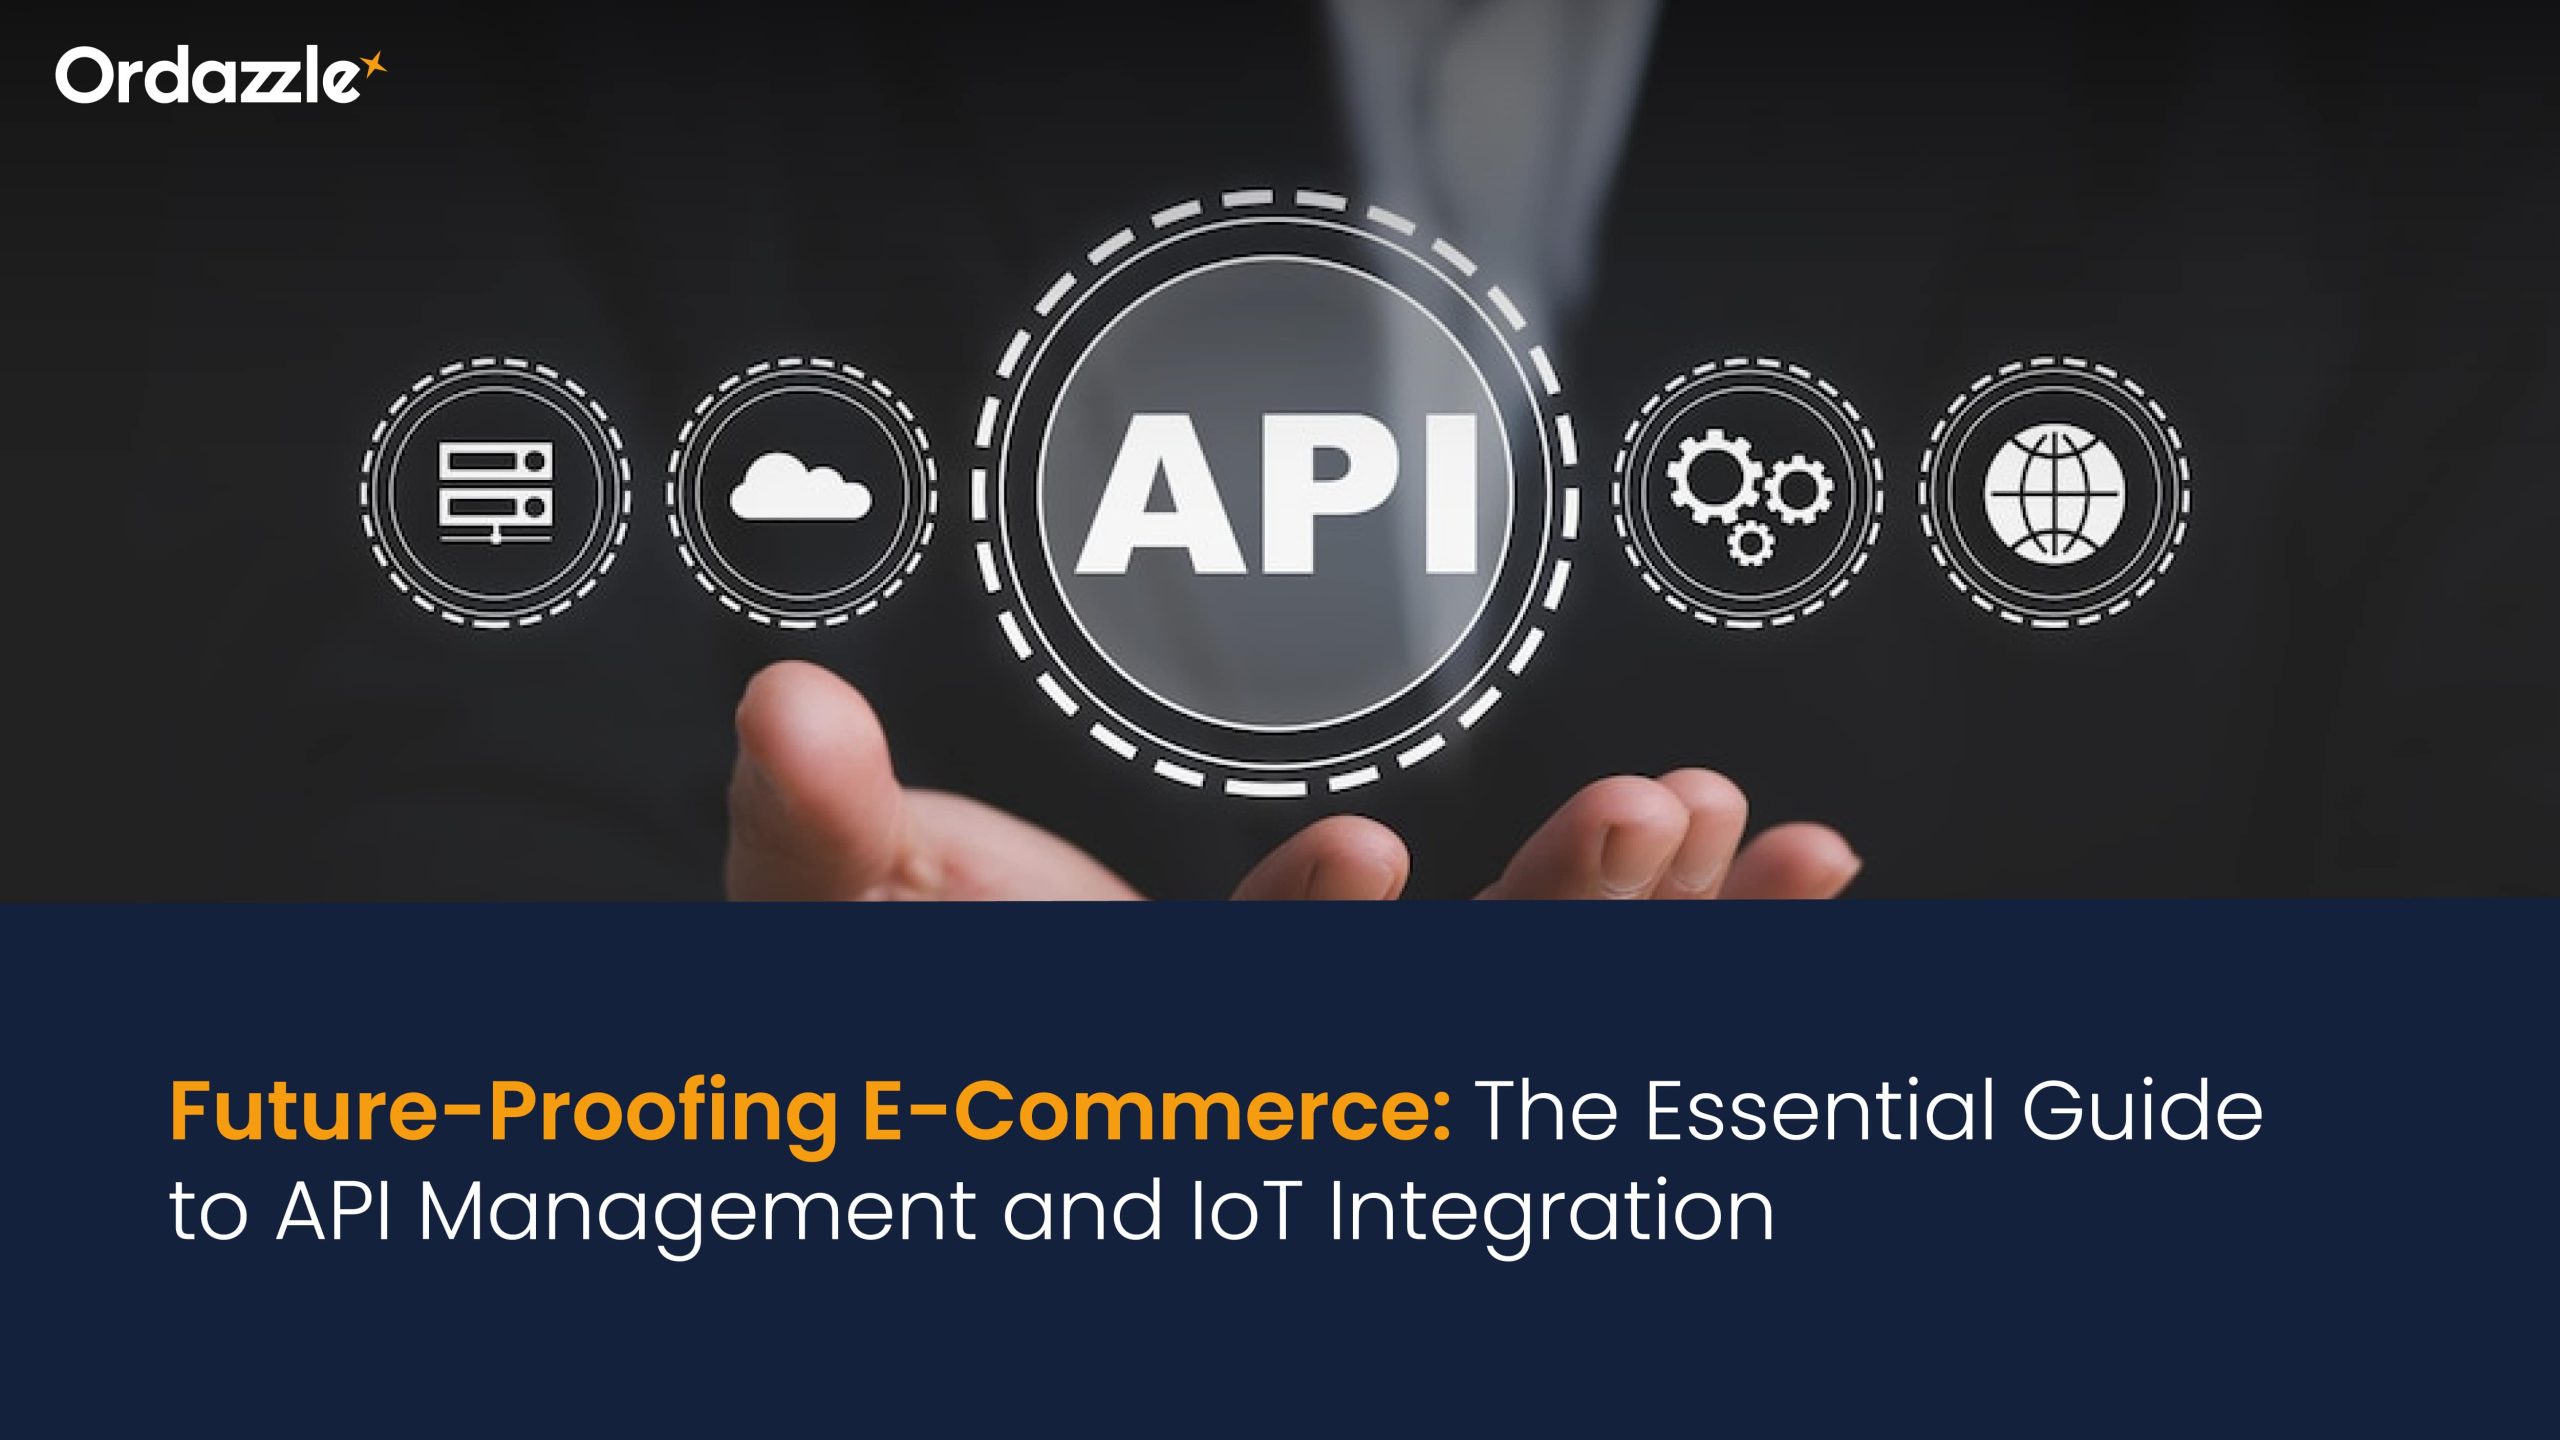 The Role of API Management